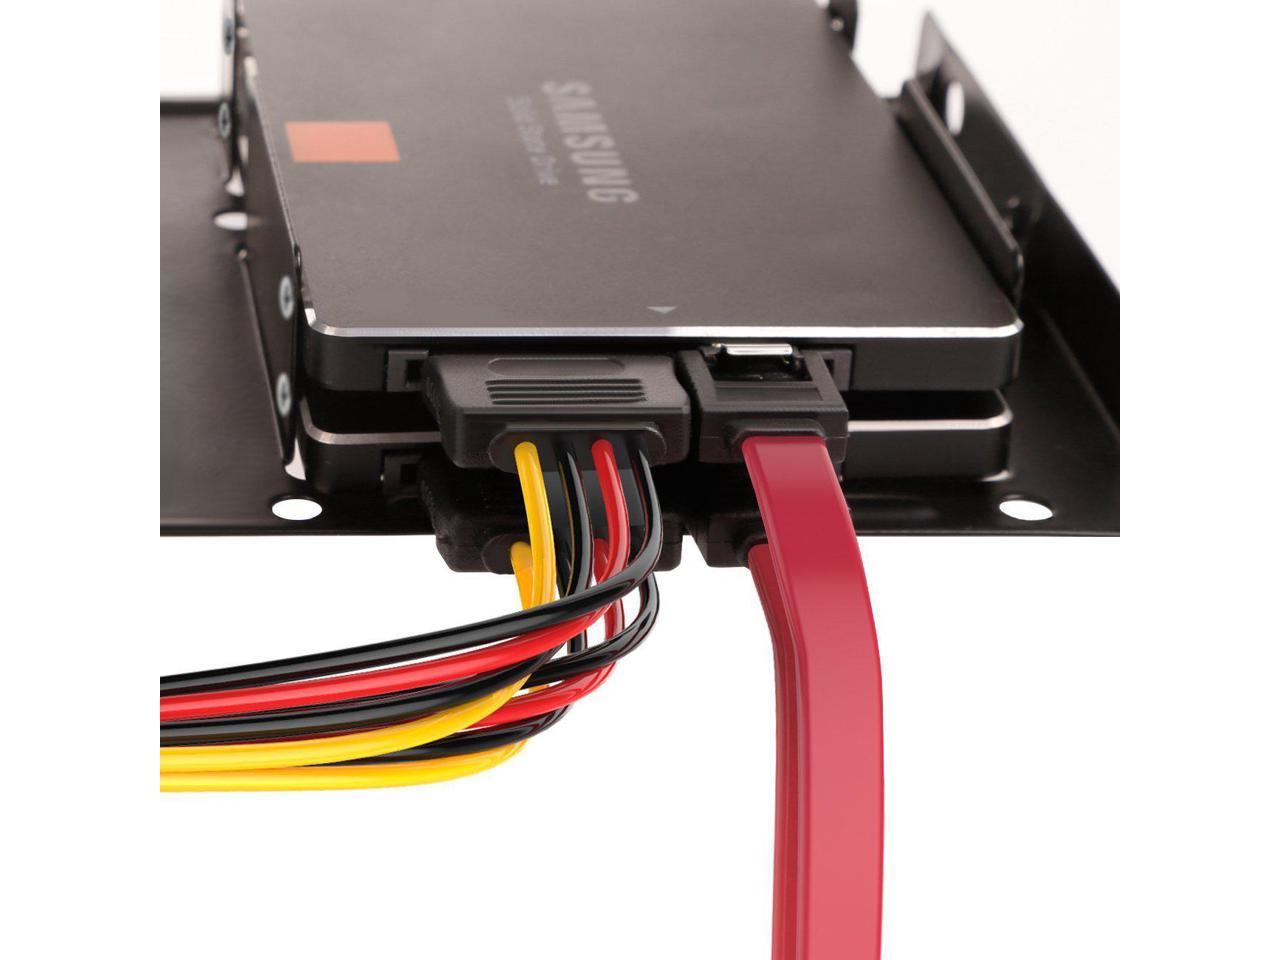 Ssd Sata Iii Hard Drive Connection Cables X Pin To Dual Pin